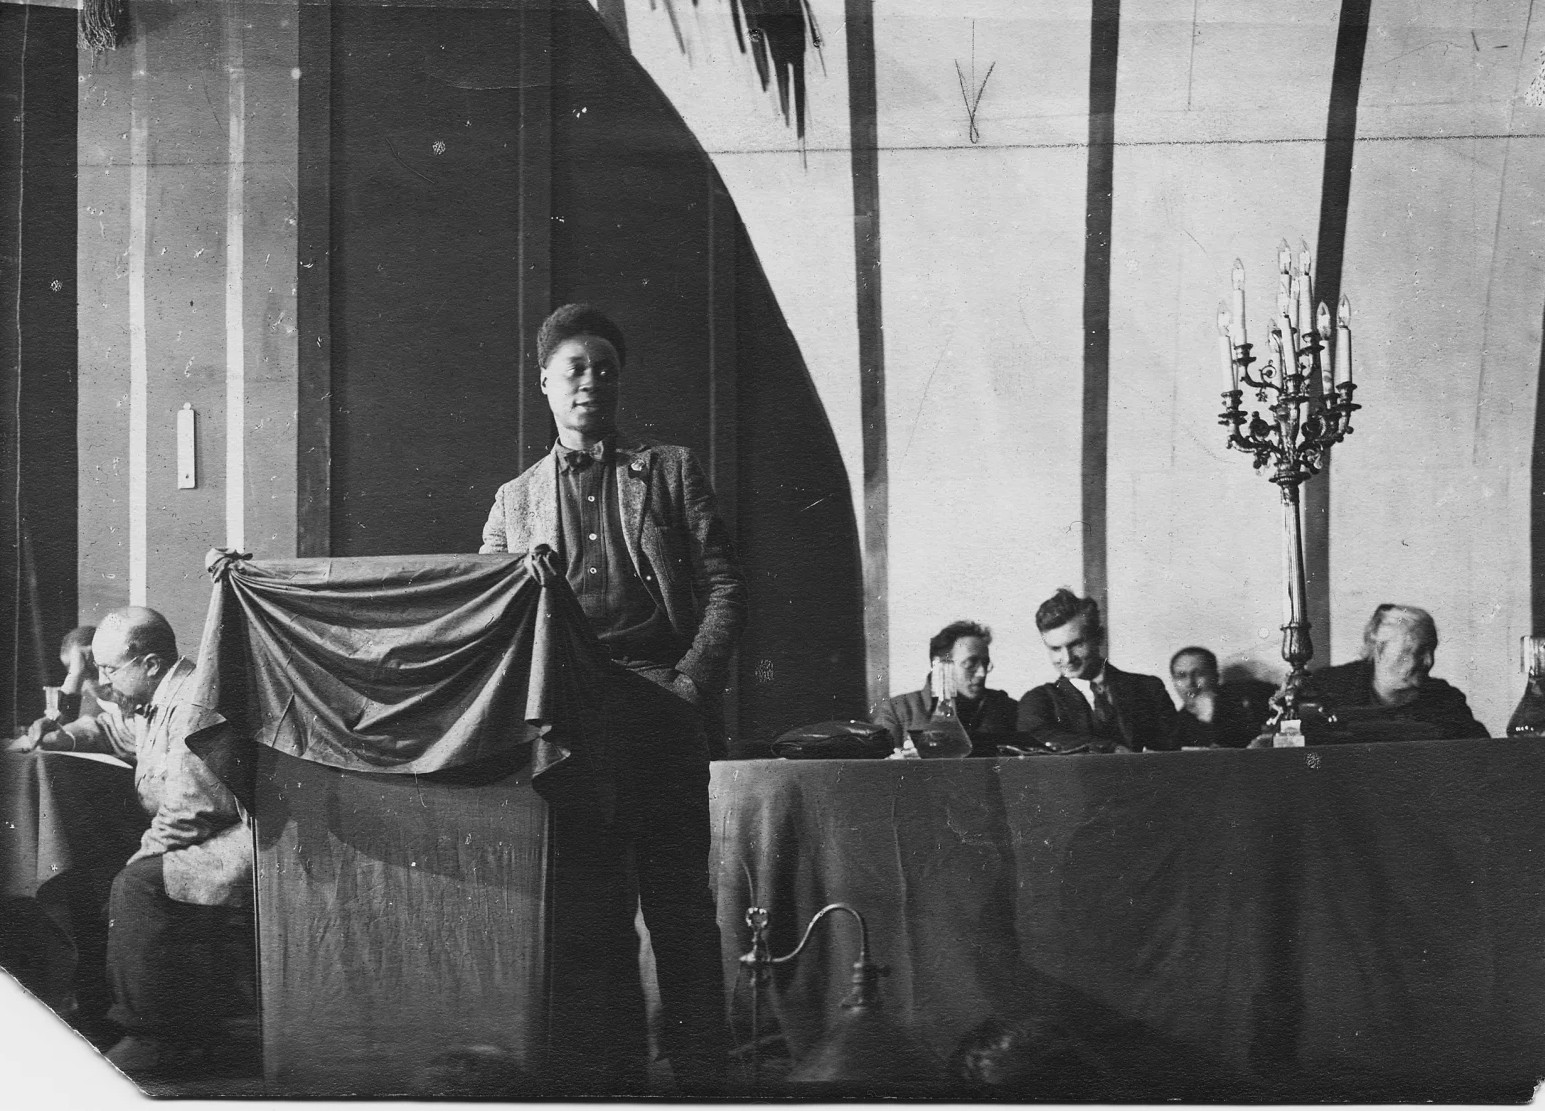 Claude McKay addressing the 4th Congress of the Comintern, 1922